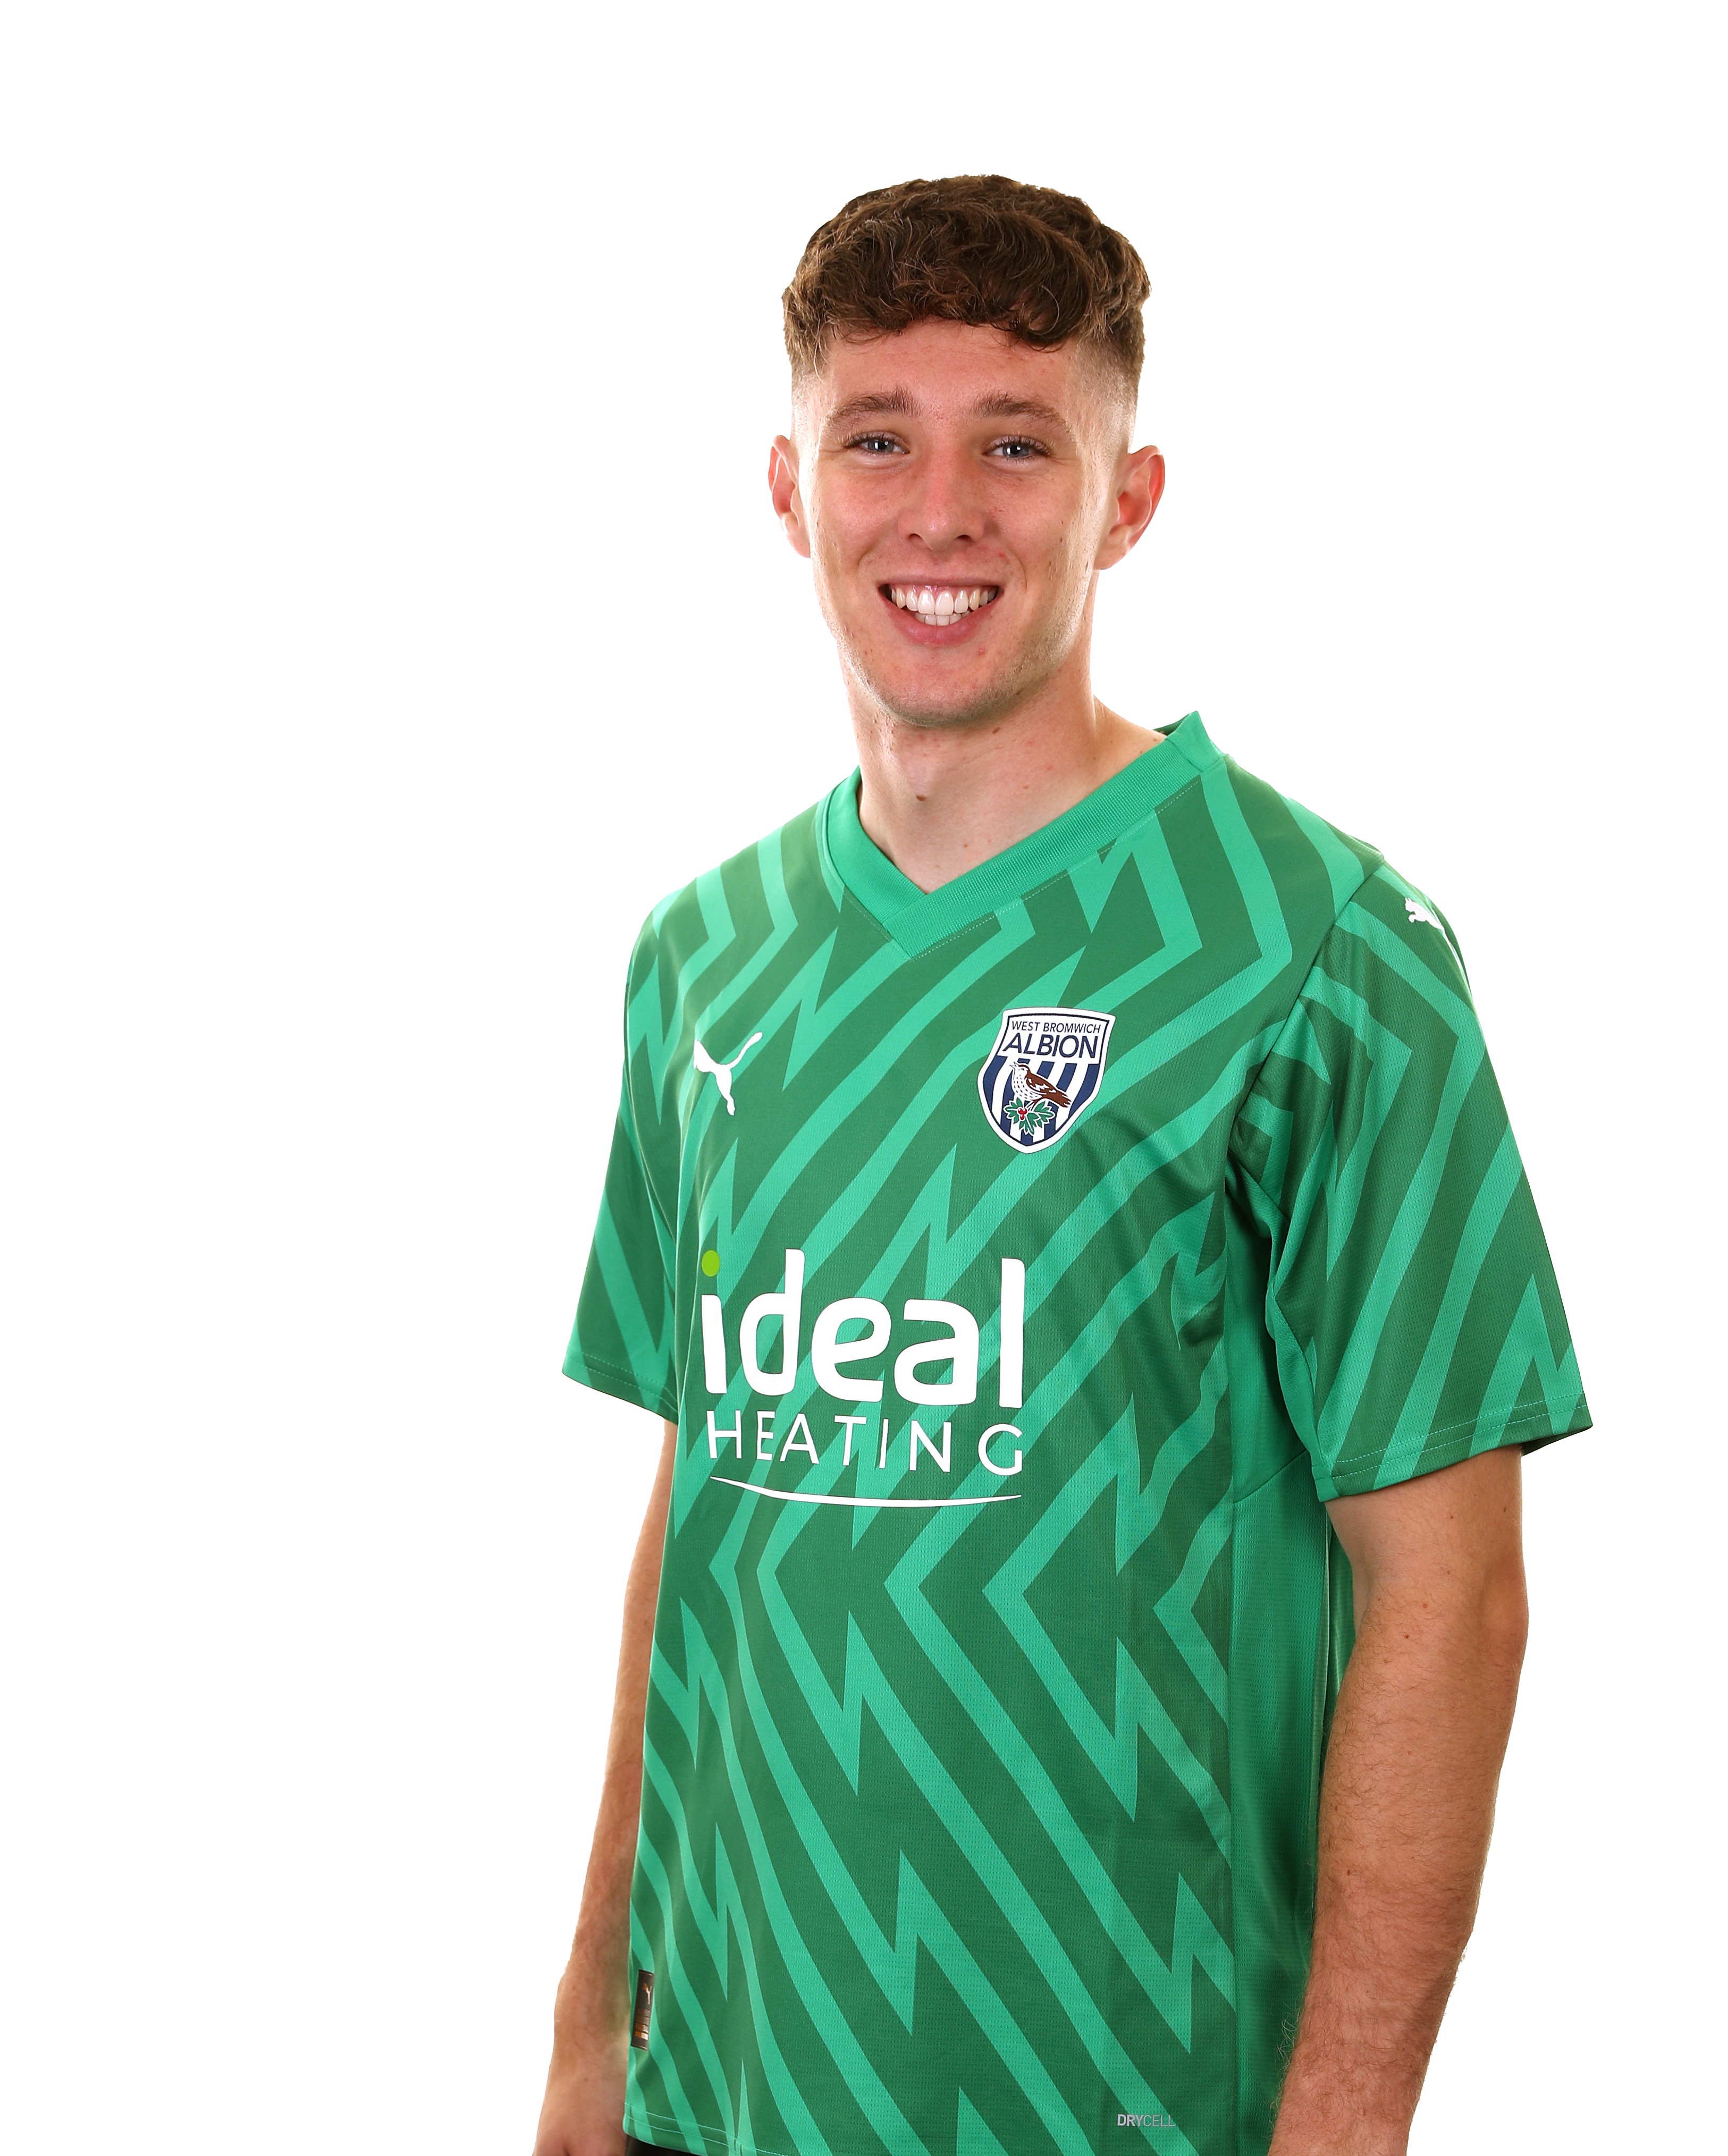 A photo headshot of Albion Under-21s player Ronnie Hollingshead ahead of the 2023/24 season